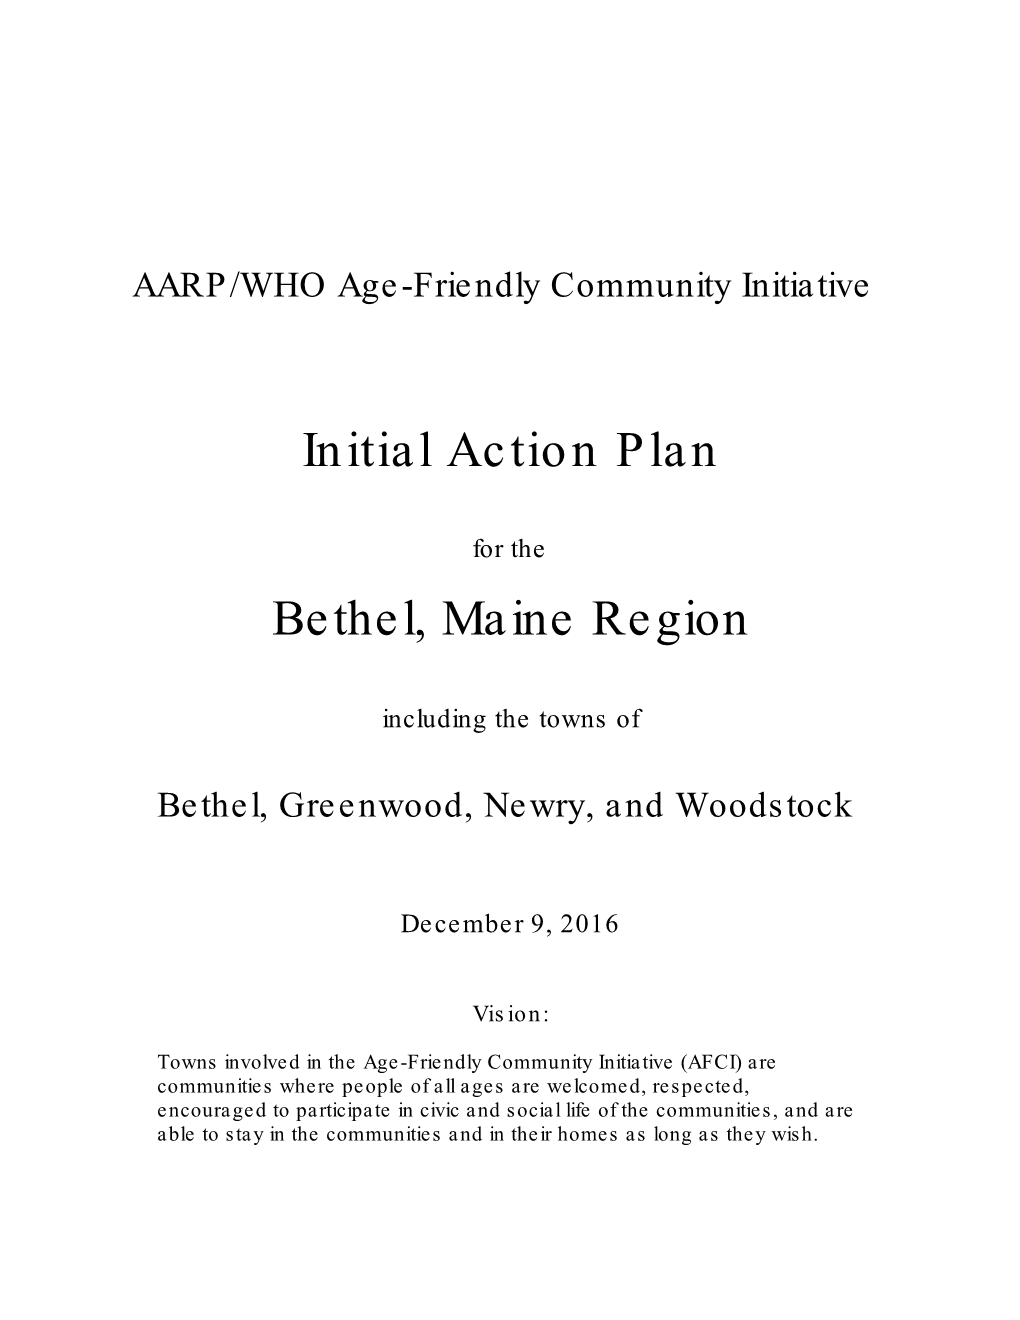 AARP-WHO Age-Friendly Community Initiative-Initial Action Plan